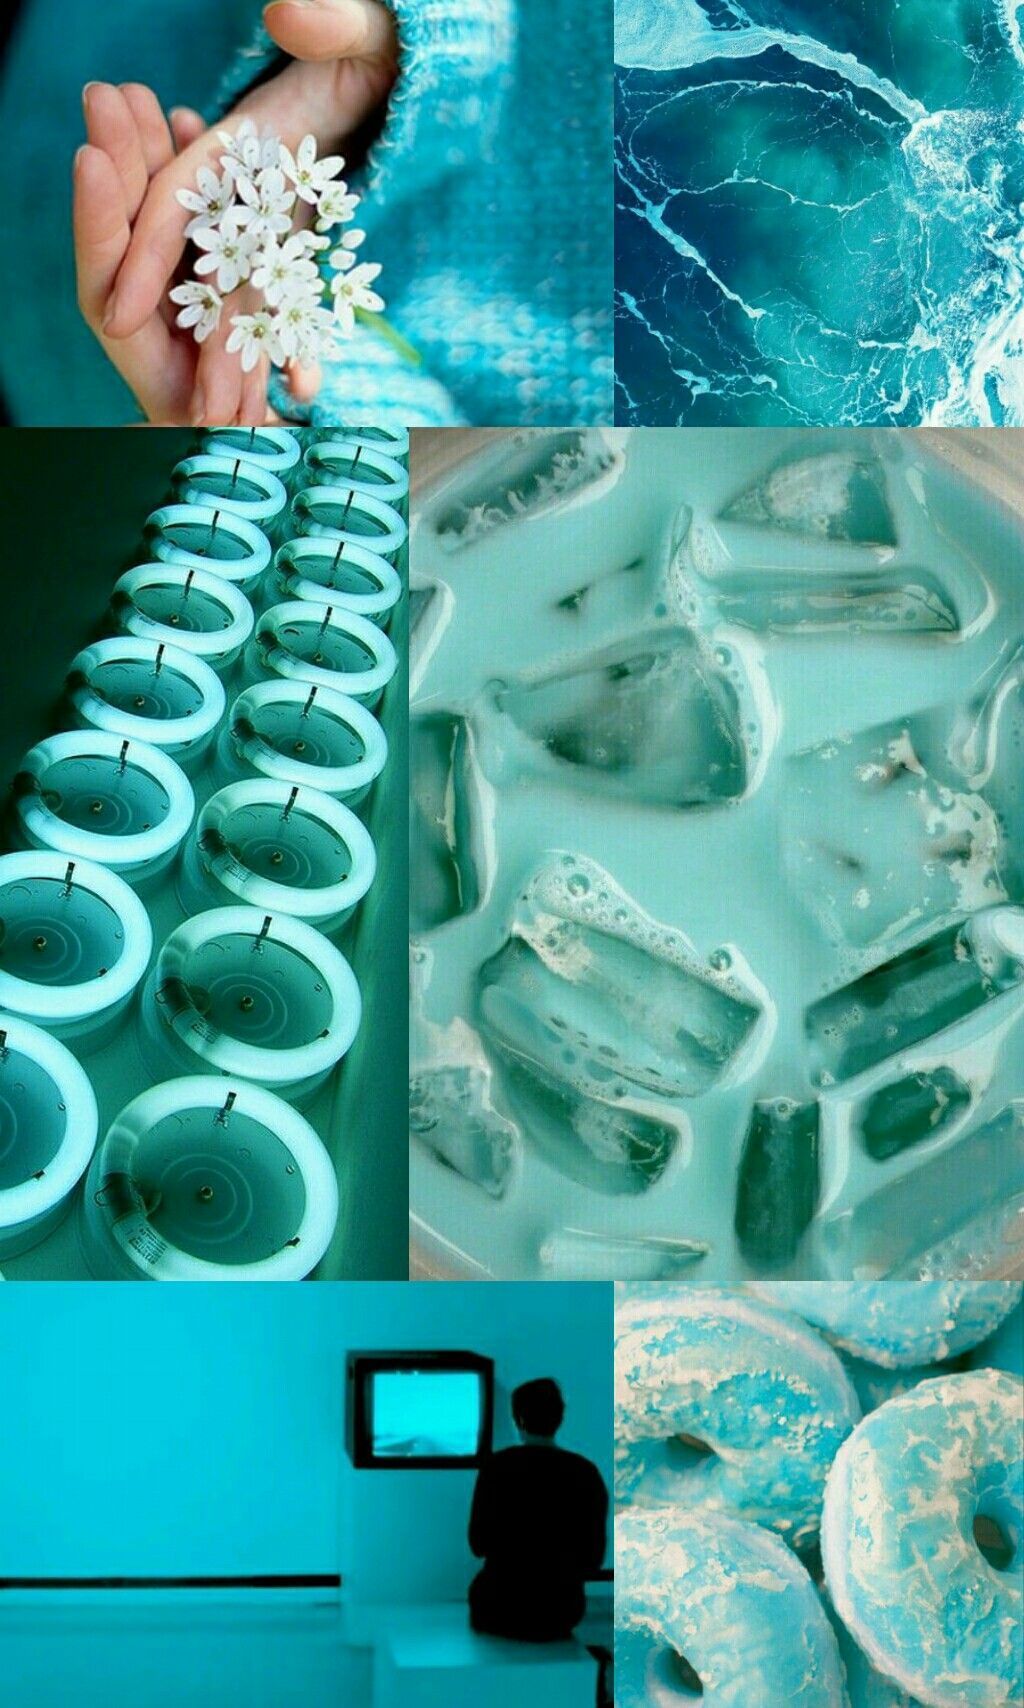 A collage of pictures with blue and white - Cyan, aqua, turquoise